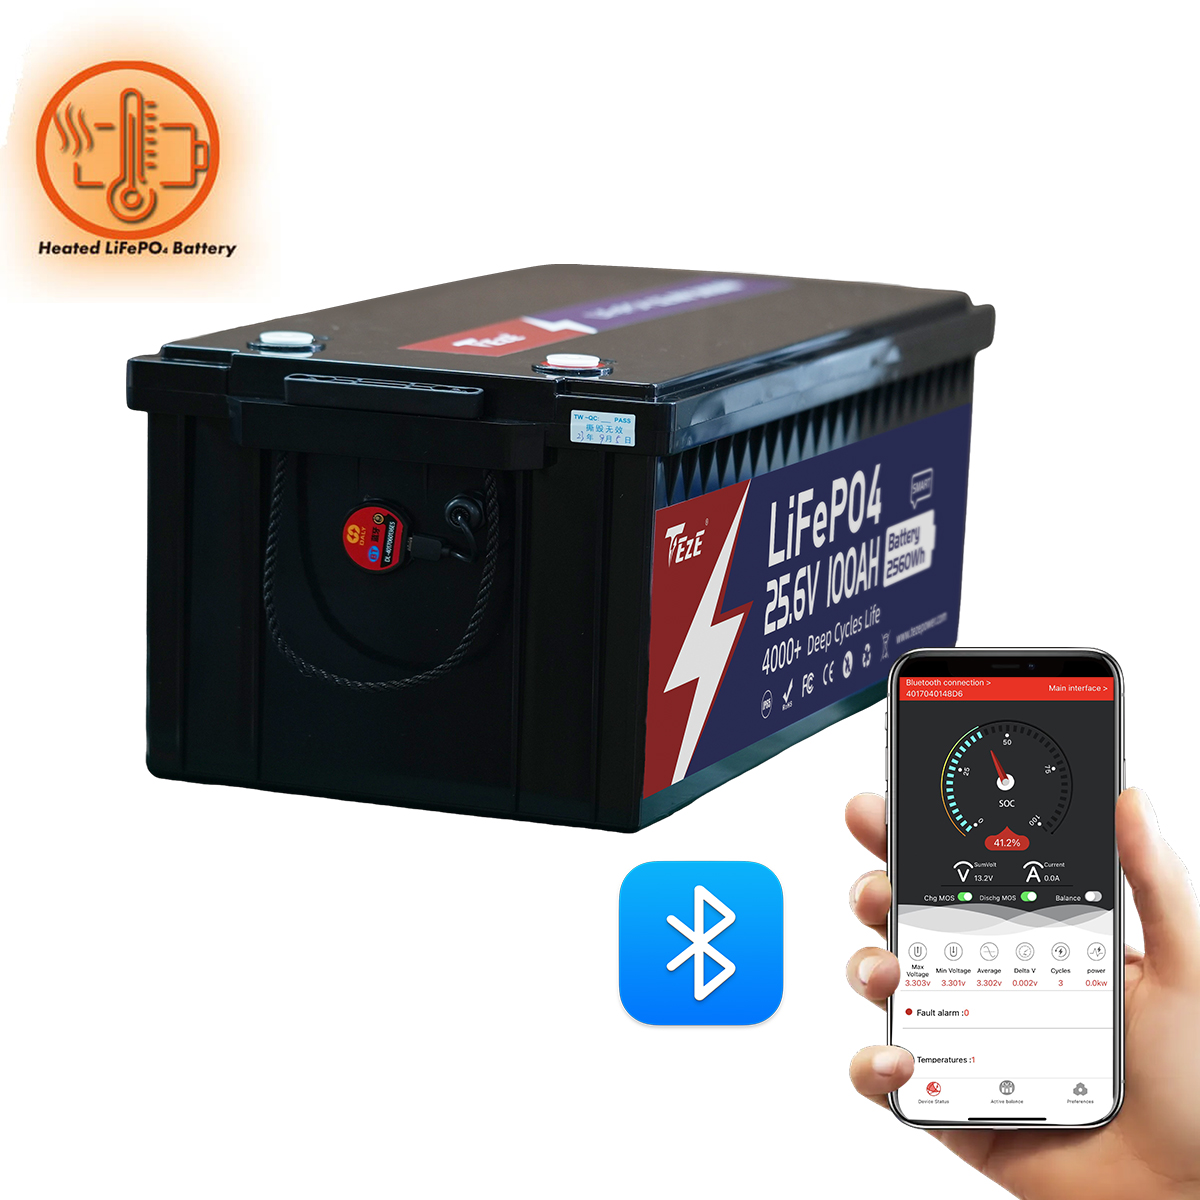 NEW-TezePower 24V100Ah LiFePO4 Battery with Bluetooth, Self-heating and Active Balancer, Built-in 100A Daly BMS (Bluetooth External Version)-TezePower